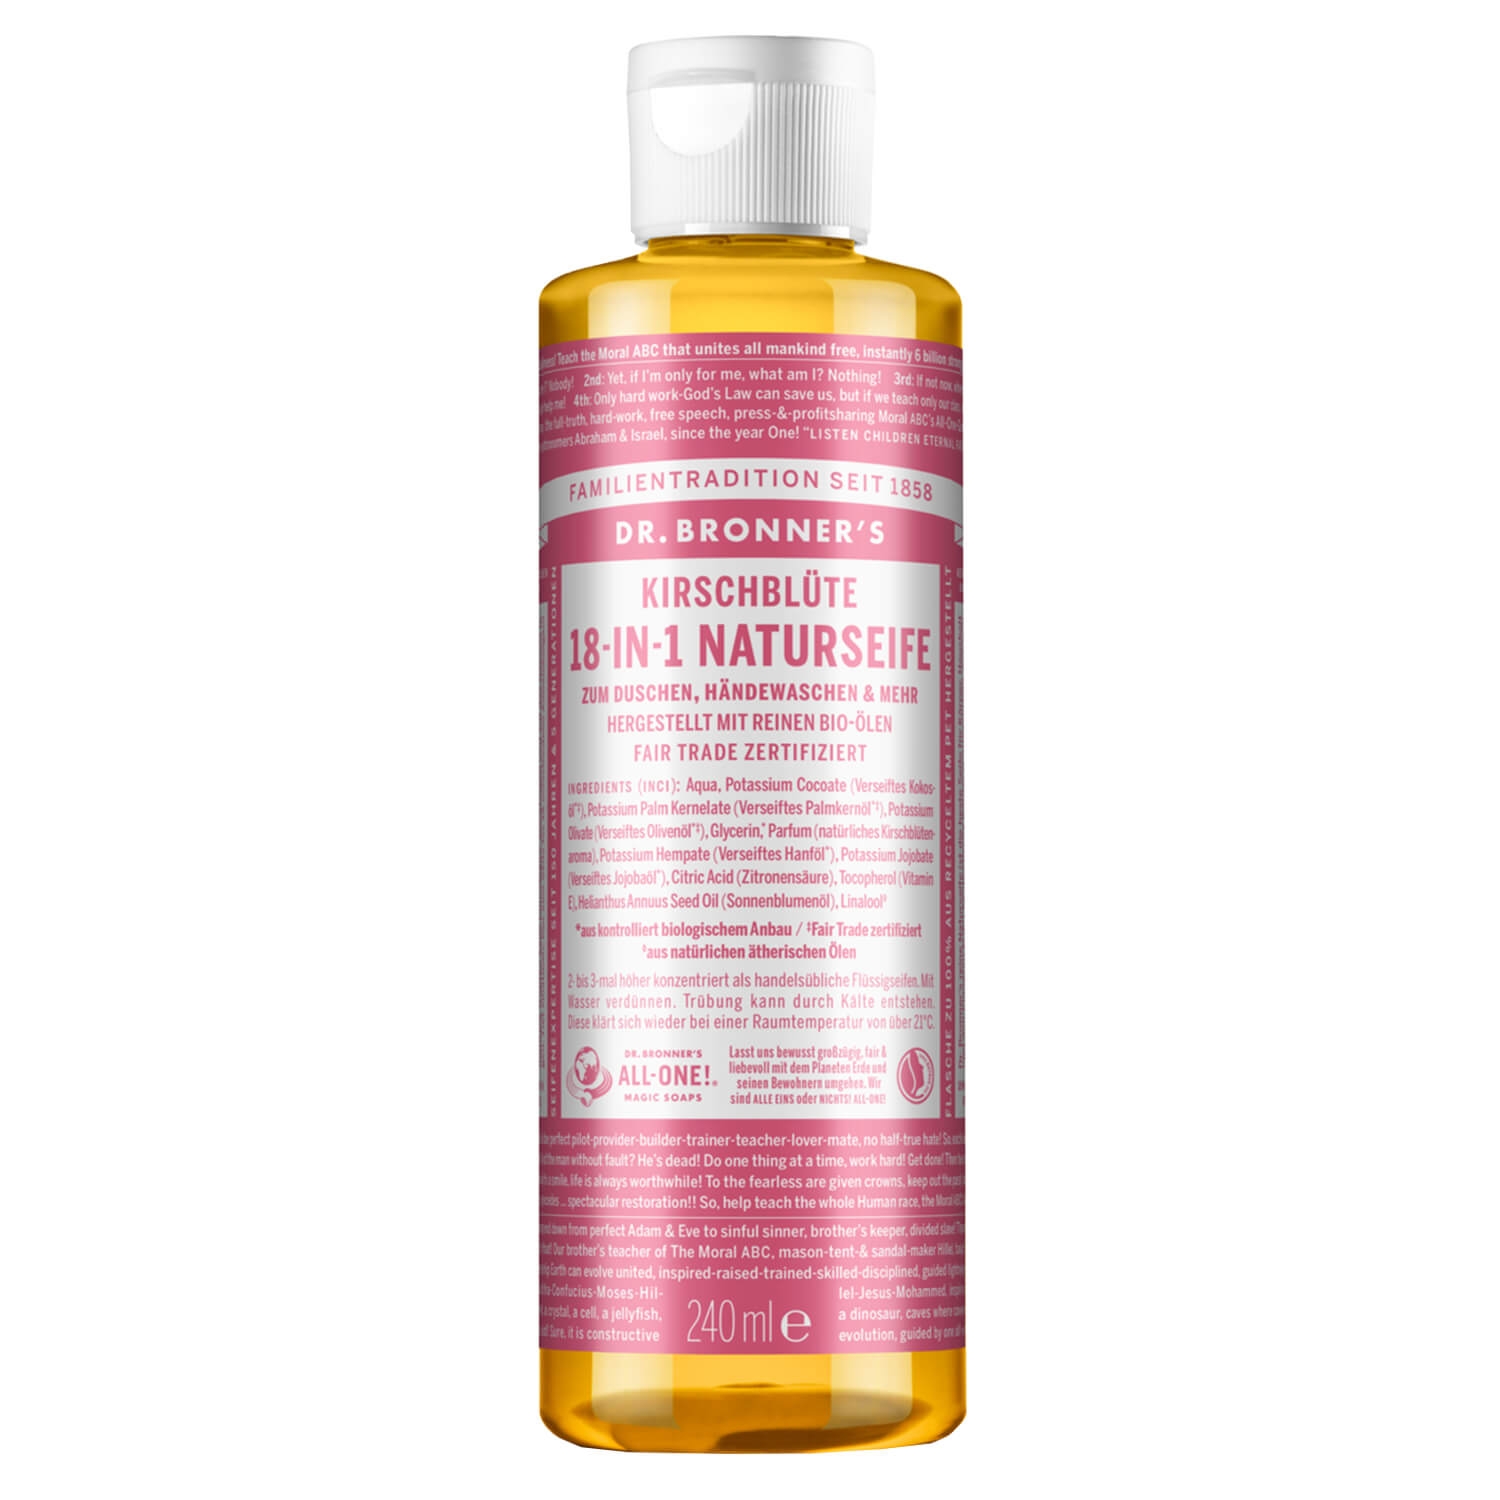 Product image from DR. BRONNER'S - 18-IN-1 Flüssigseife Cherry Blossom